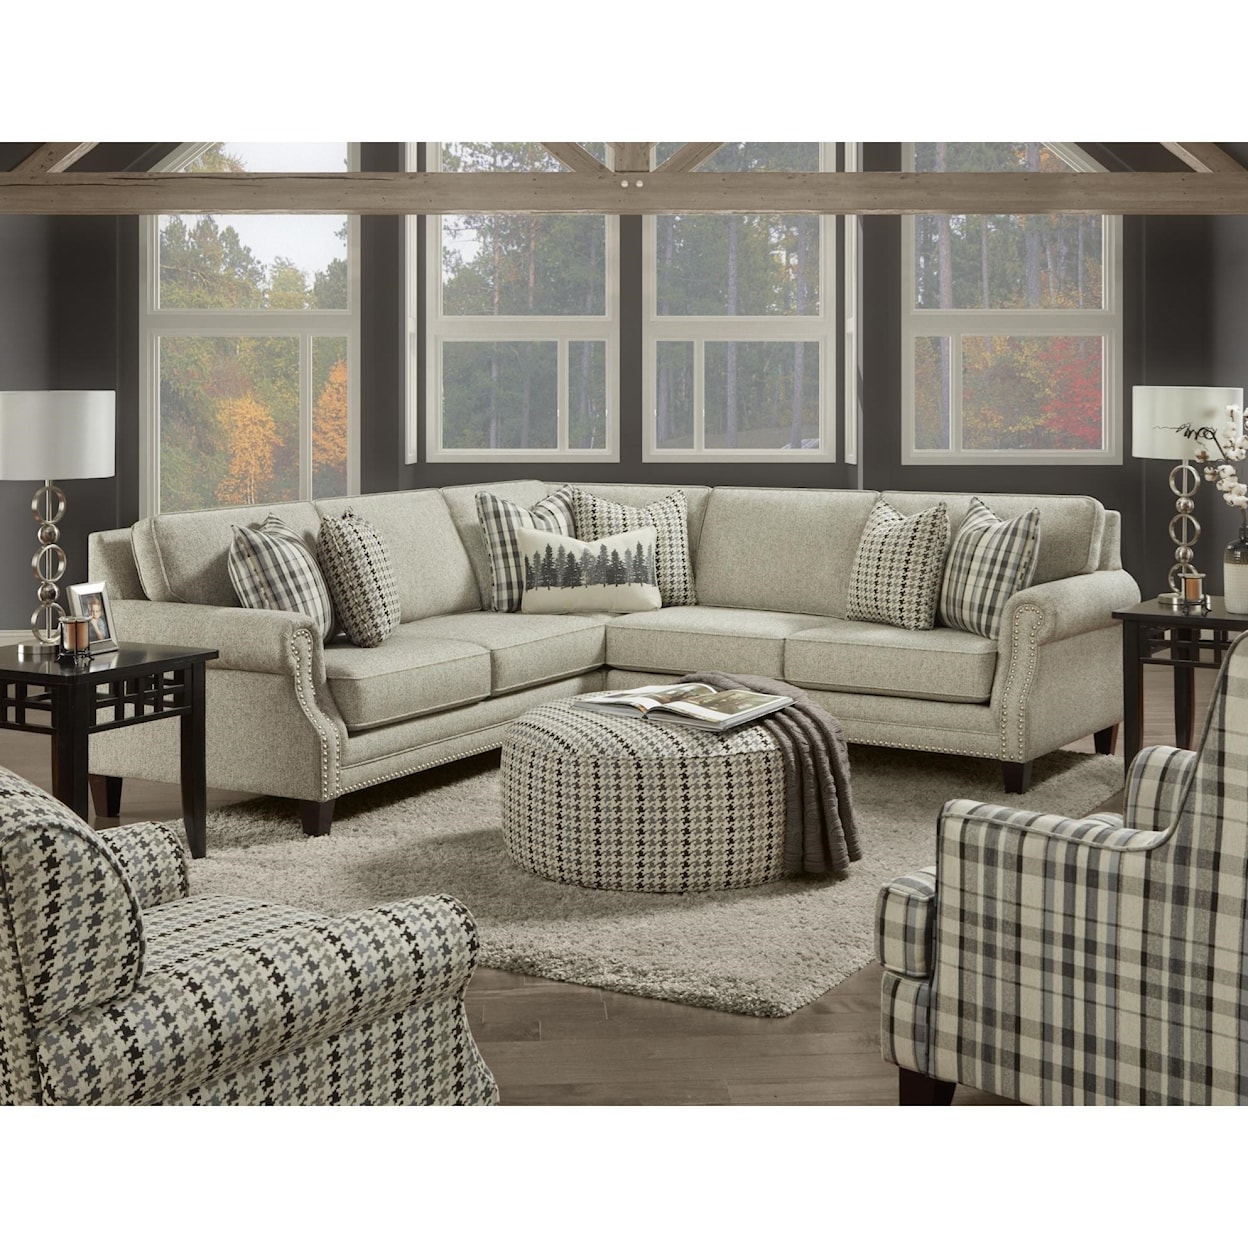 Fusion Furniture 2531-21 PAPERCHASE BERBER (REVOLUTION) 4-Seat Sectional Sofa